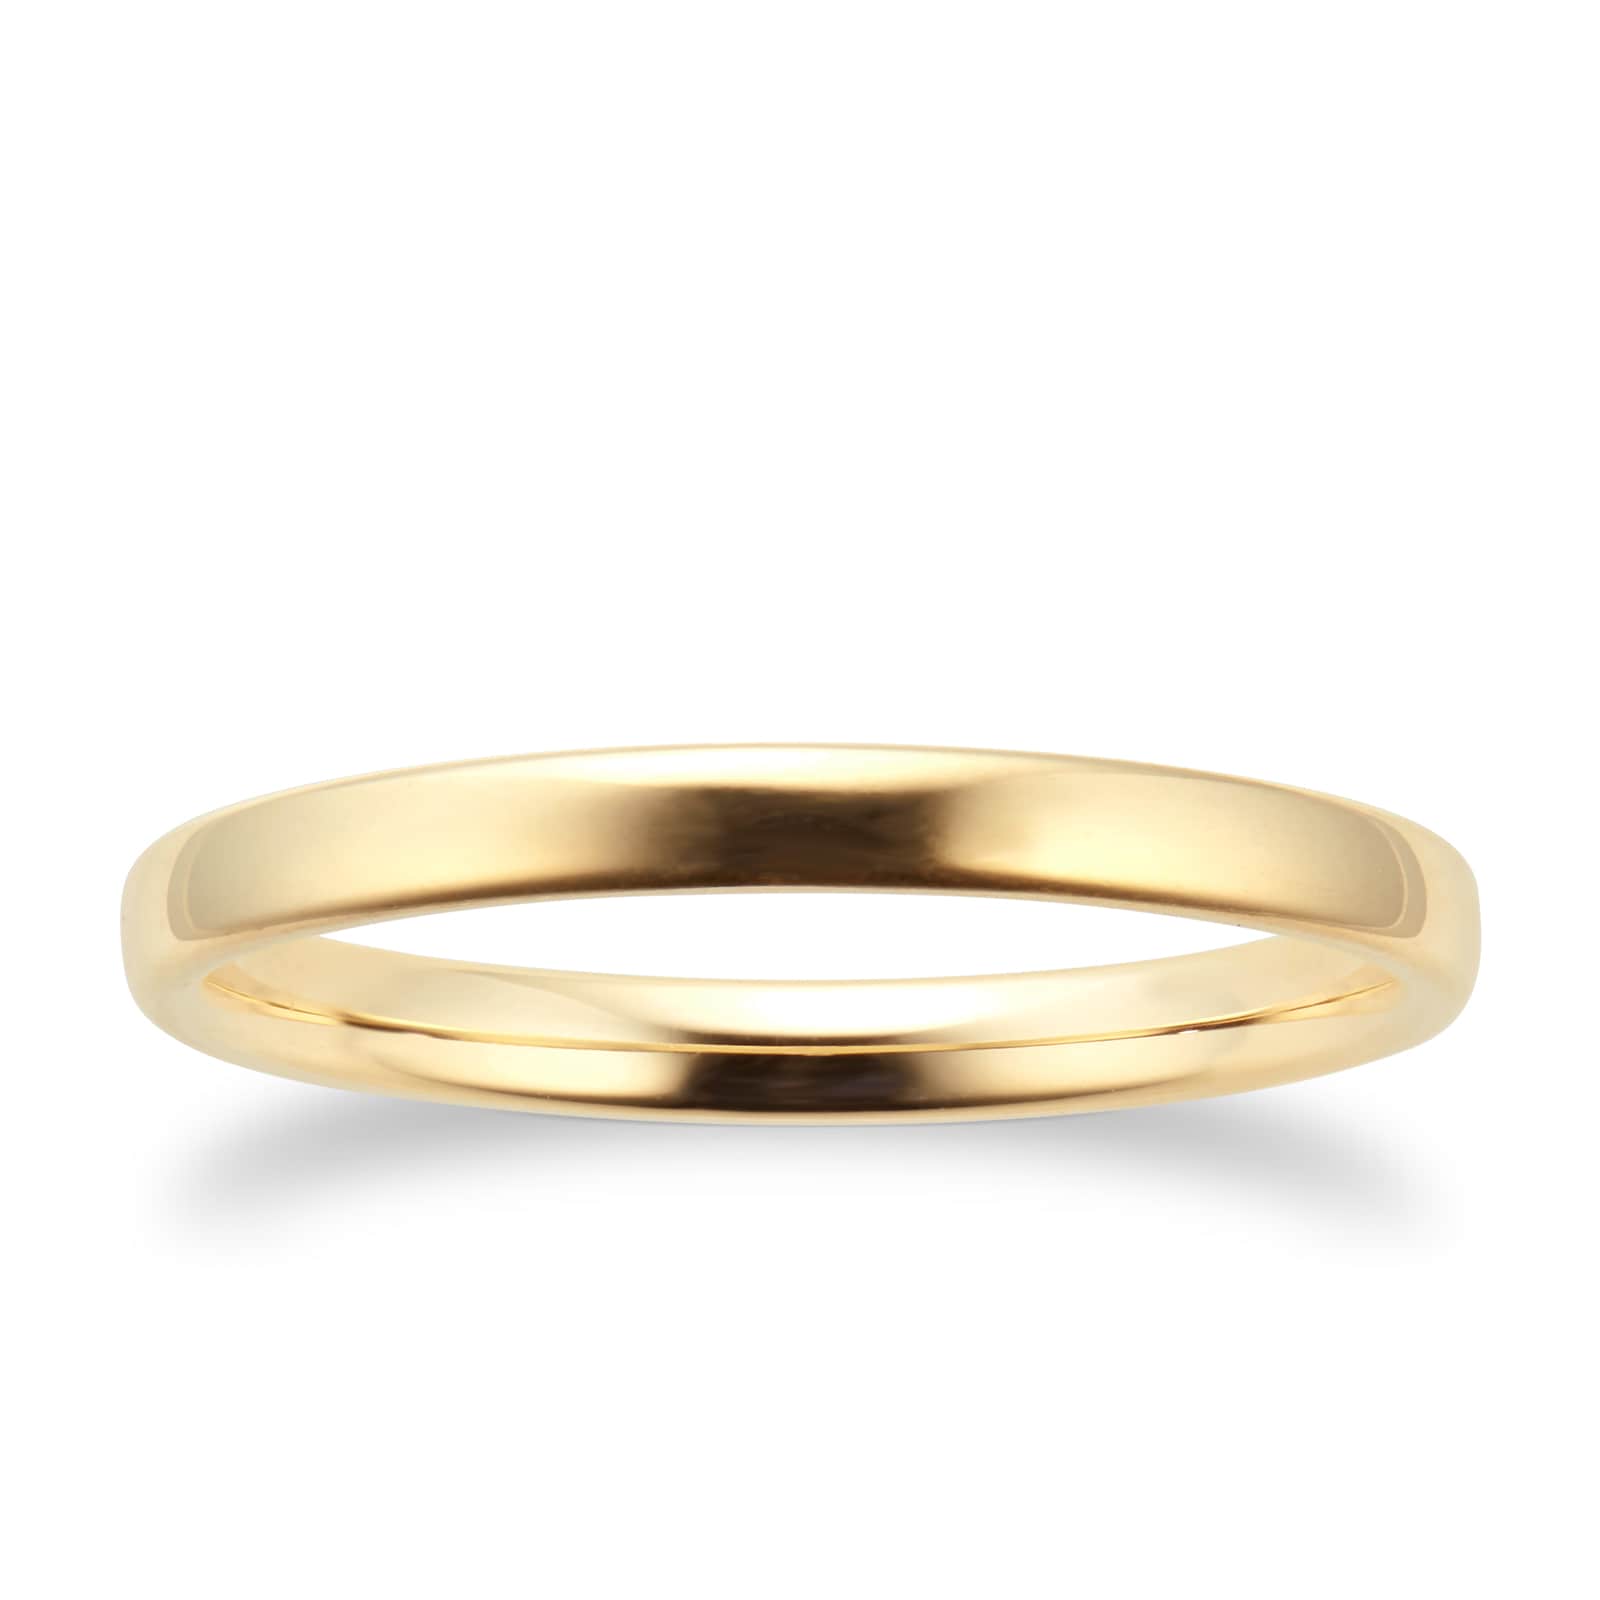 2mm Slight Court Standard Wedding Ring In 9 Carat Yellow Gold Ring Size S